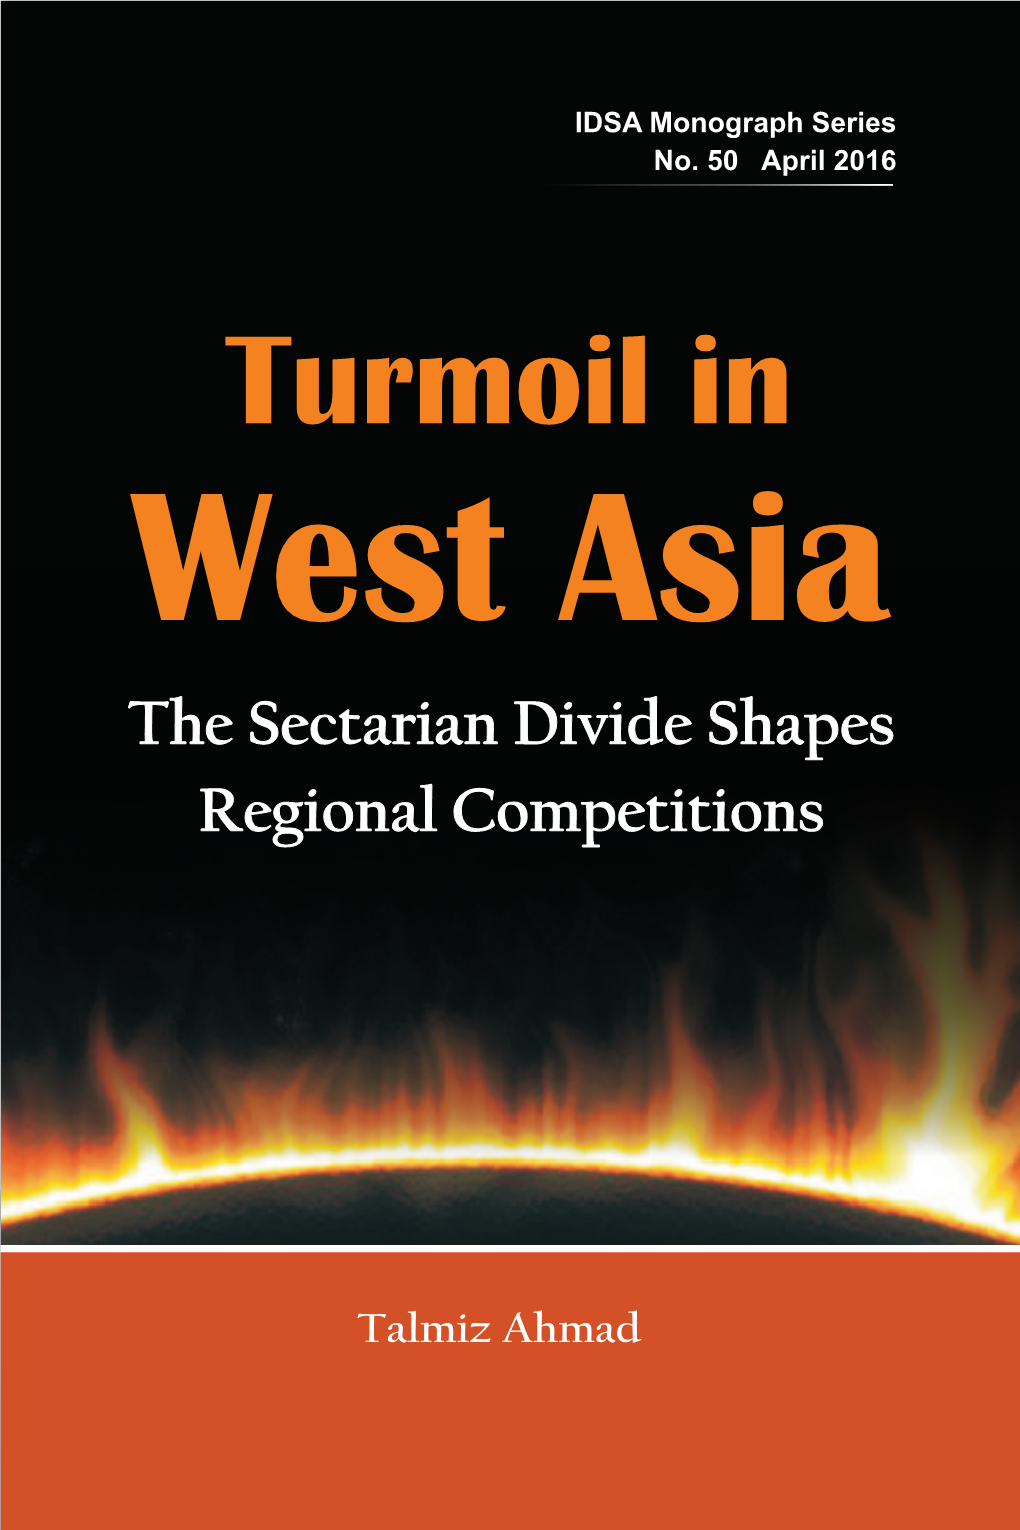 Turmoil in West Asia the Sectarian Divide Shapes Regional Competitions